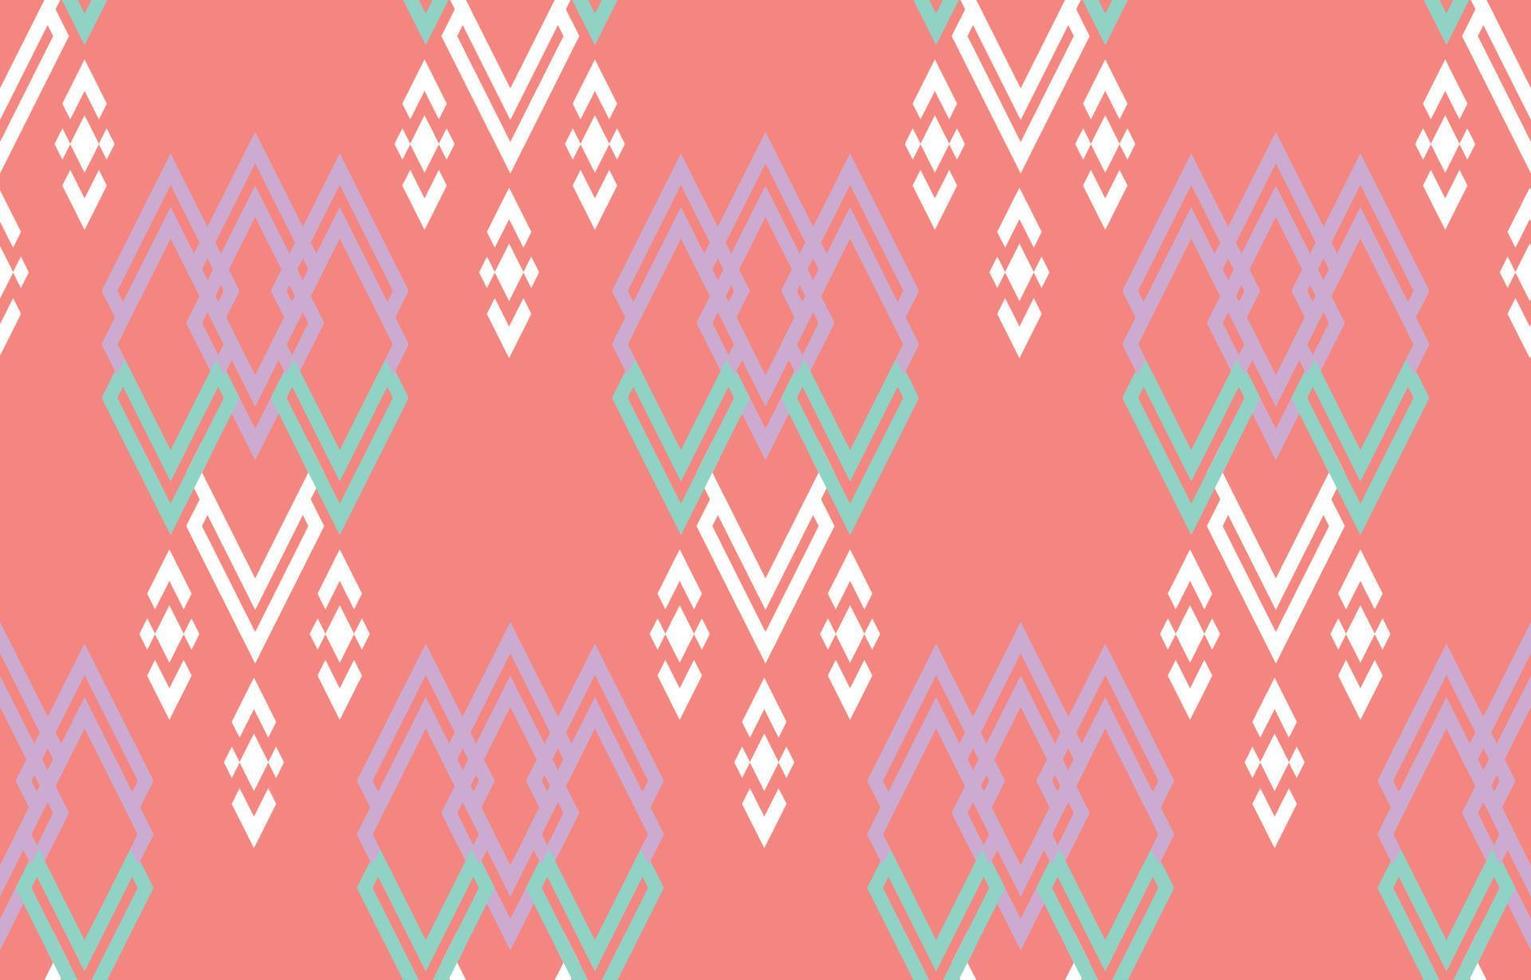 Ethnic pink pattern art. Seamless pattern in tribal, folk embroidery, and Mexican style. Aztec geometric art ornament print.Design for carpet, wallpaper, clothing, wrapping, fabric, cover, textile vector